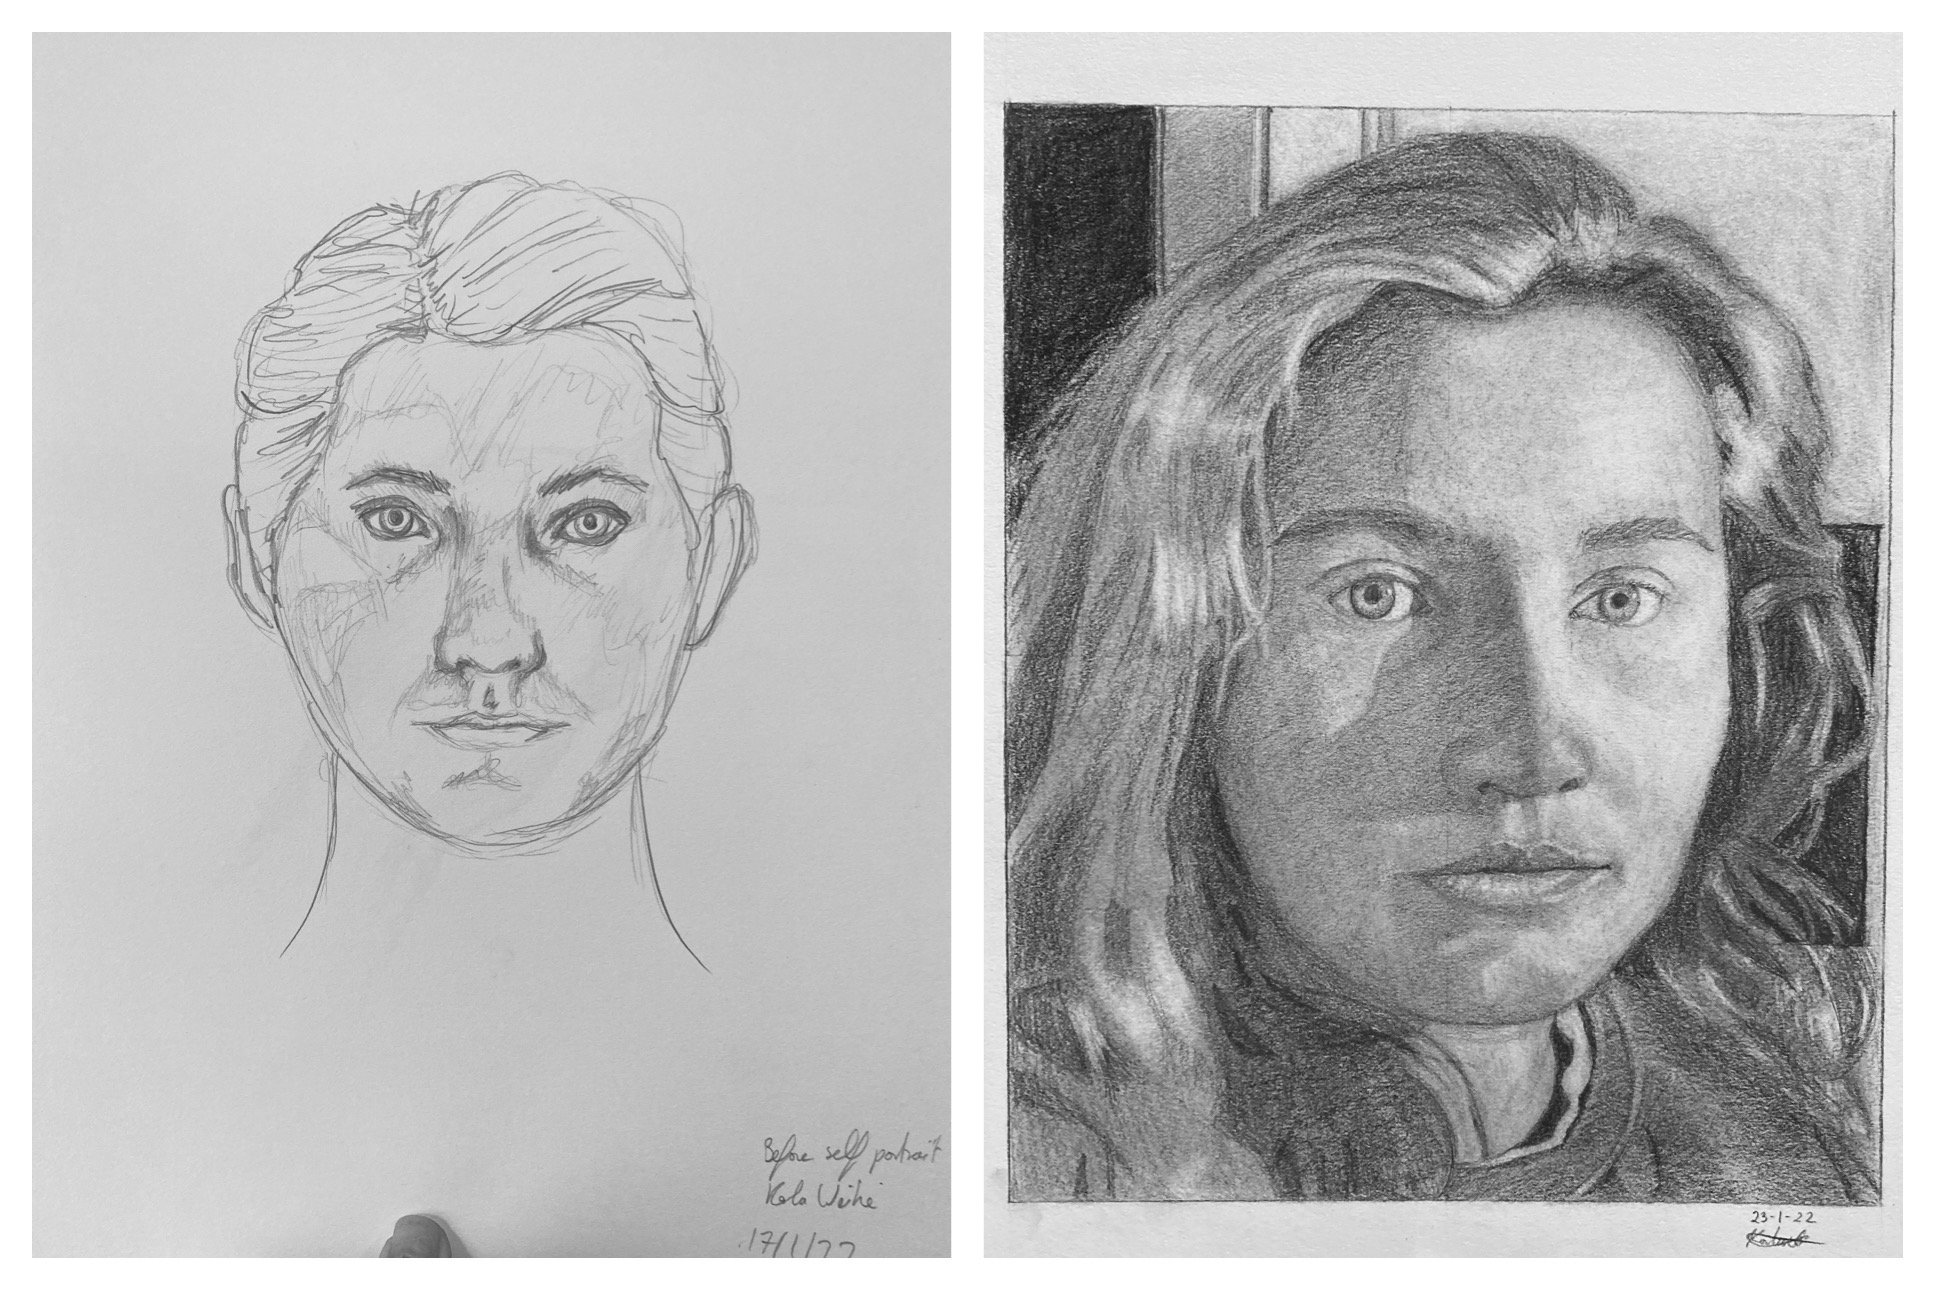 Karla W's Before and After Self-Portraits January 17-22